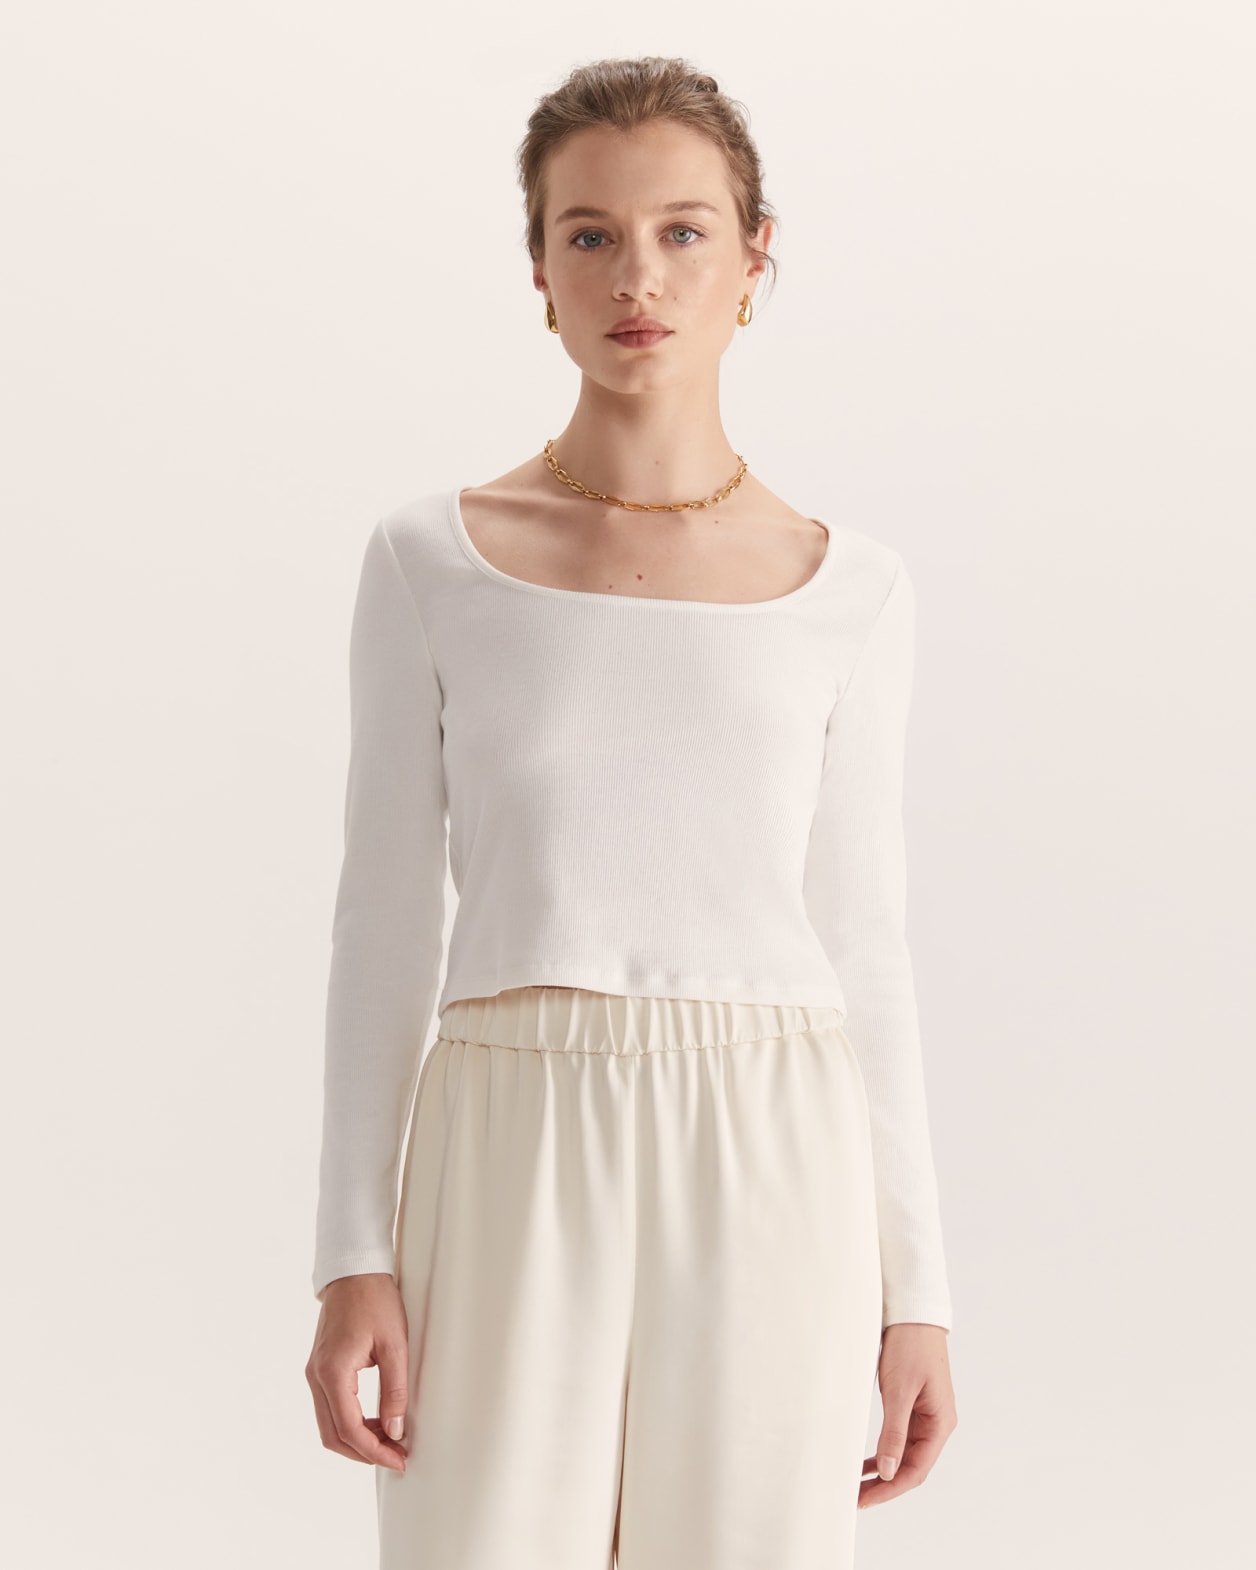 Sasha Long Sleeve Scooped Neck Top in IVORY